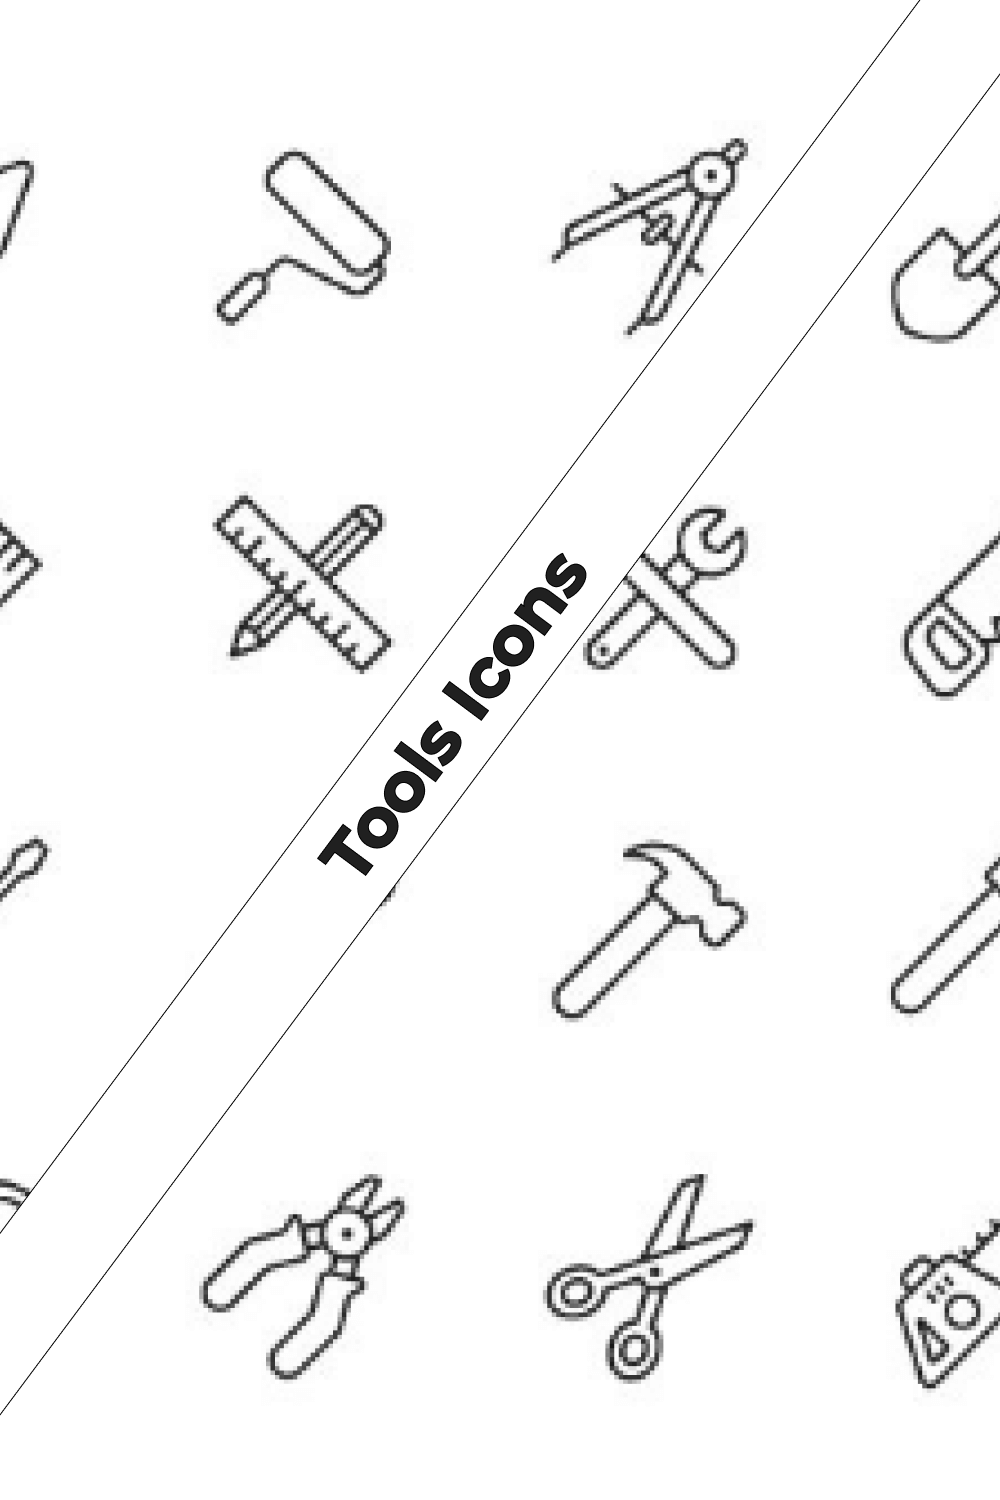 Tools icons for mobile.